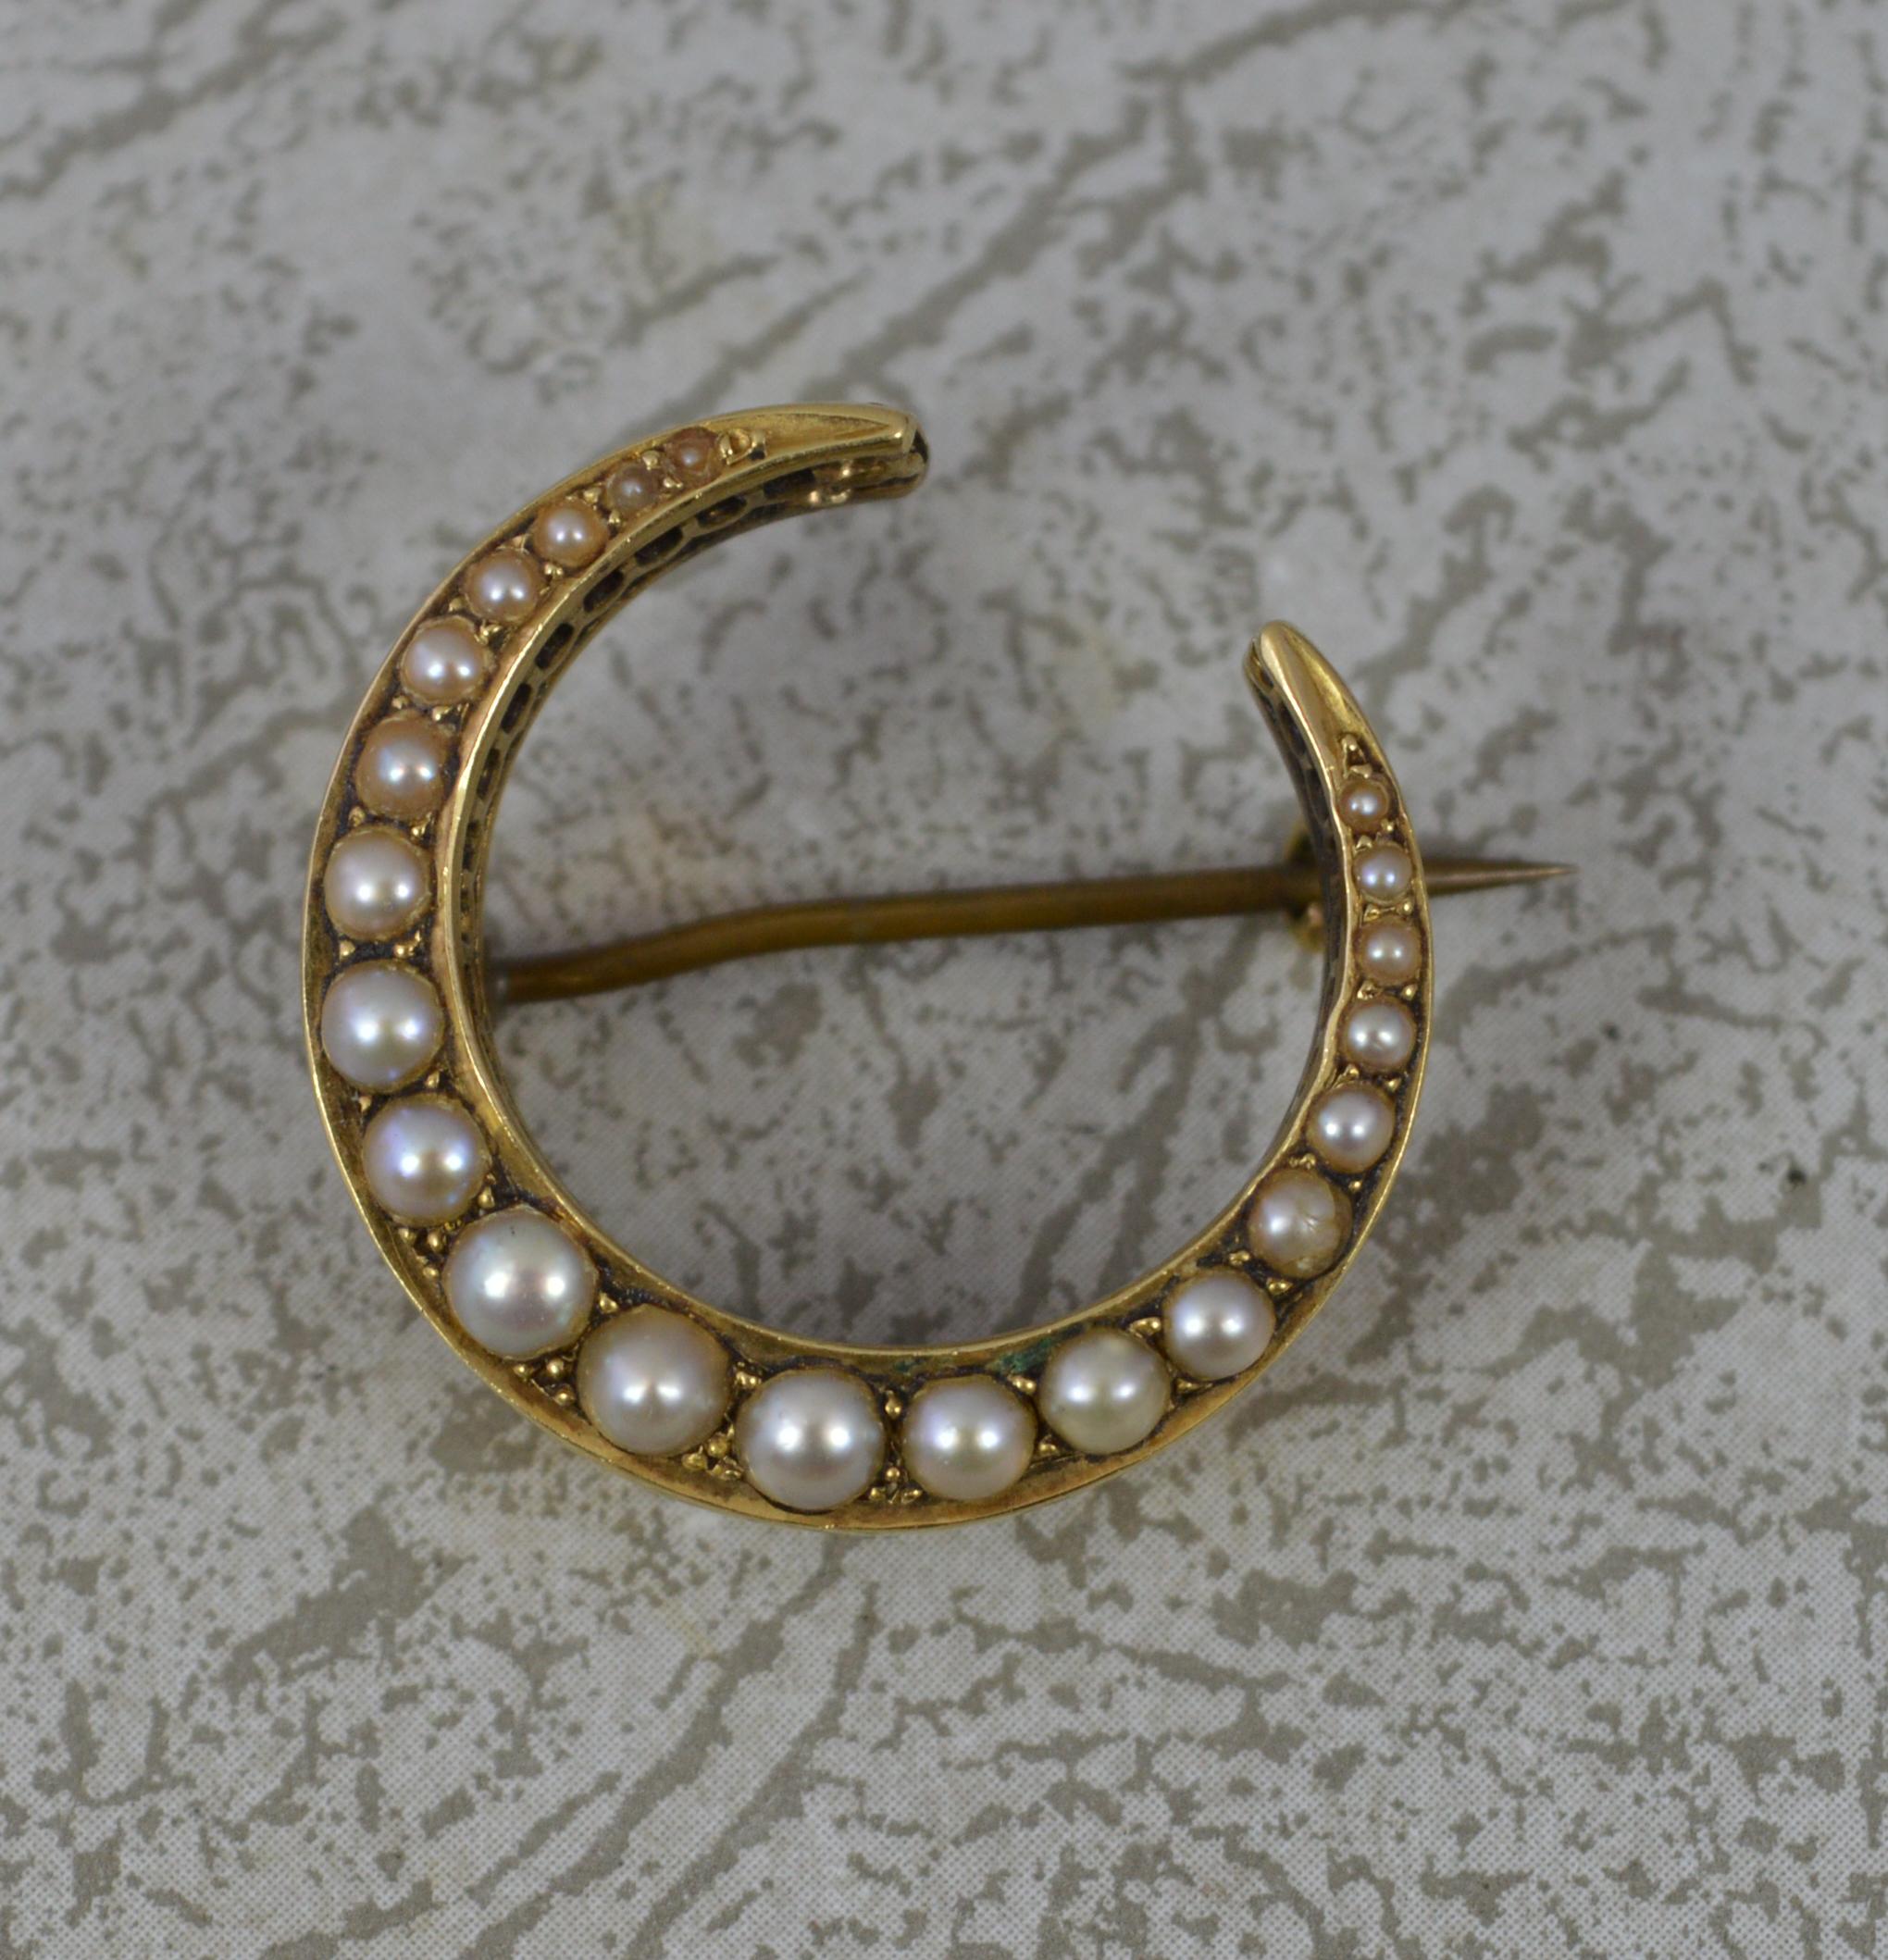 Round Cut Victorian 15 Carat Gold and Pearl Crescent Brooch